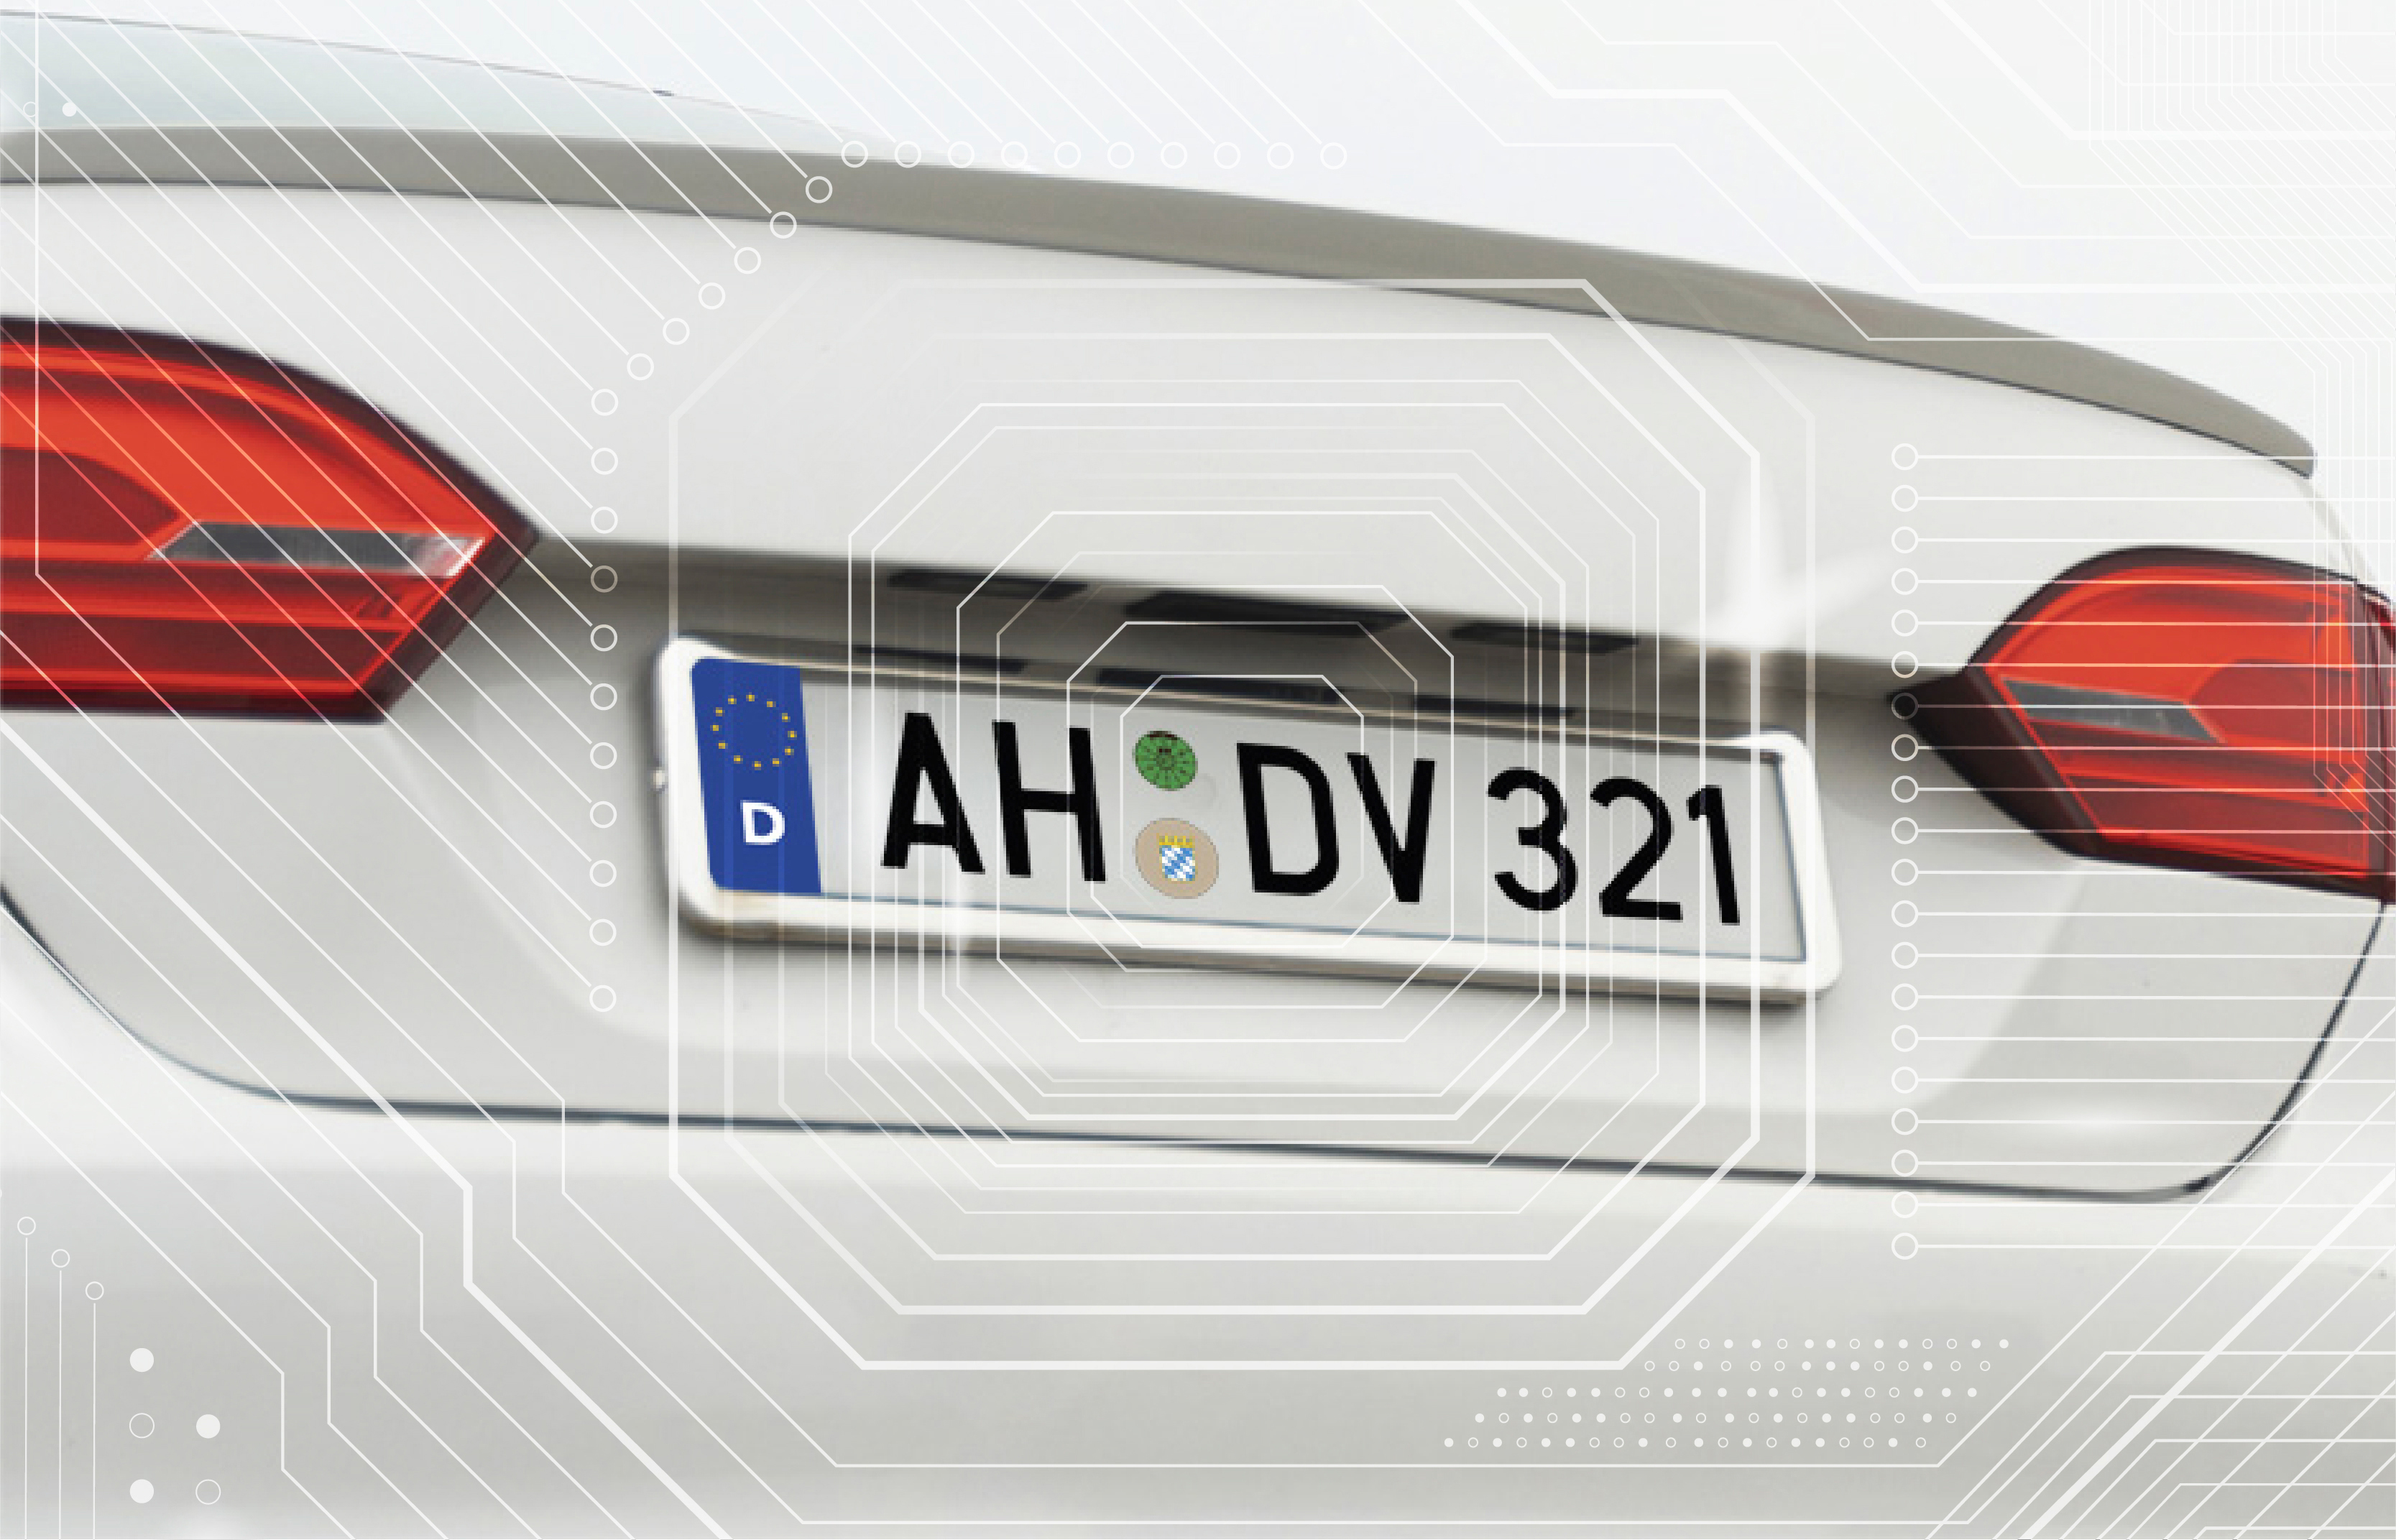  This new name also represents our determination to lead in the field of artificial intelligence applied to license plate recognition systems.